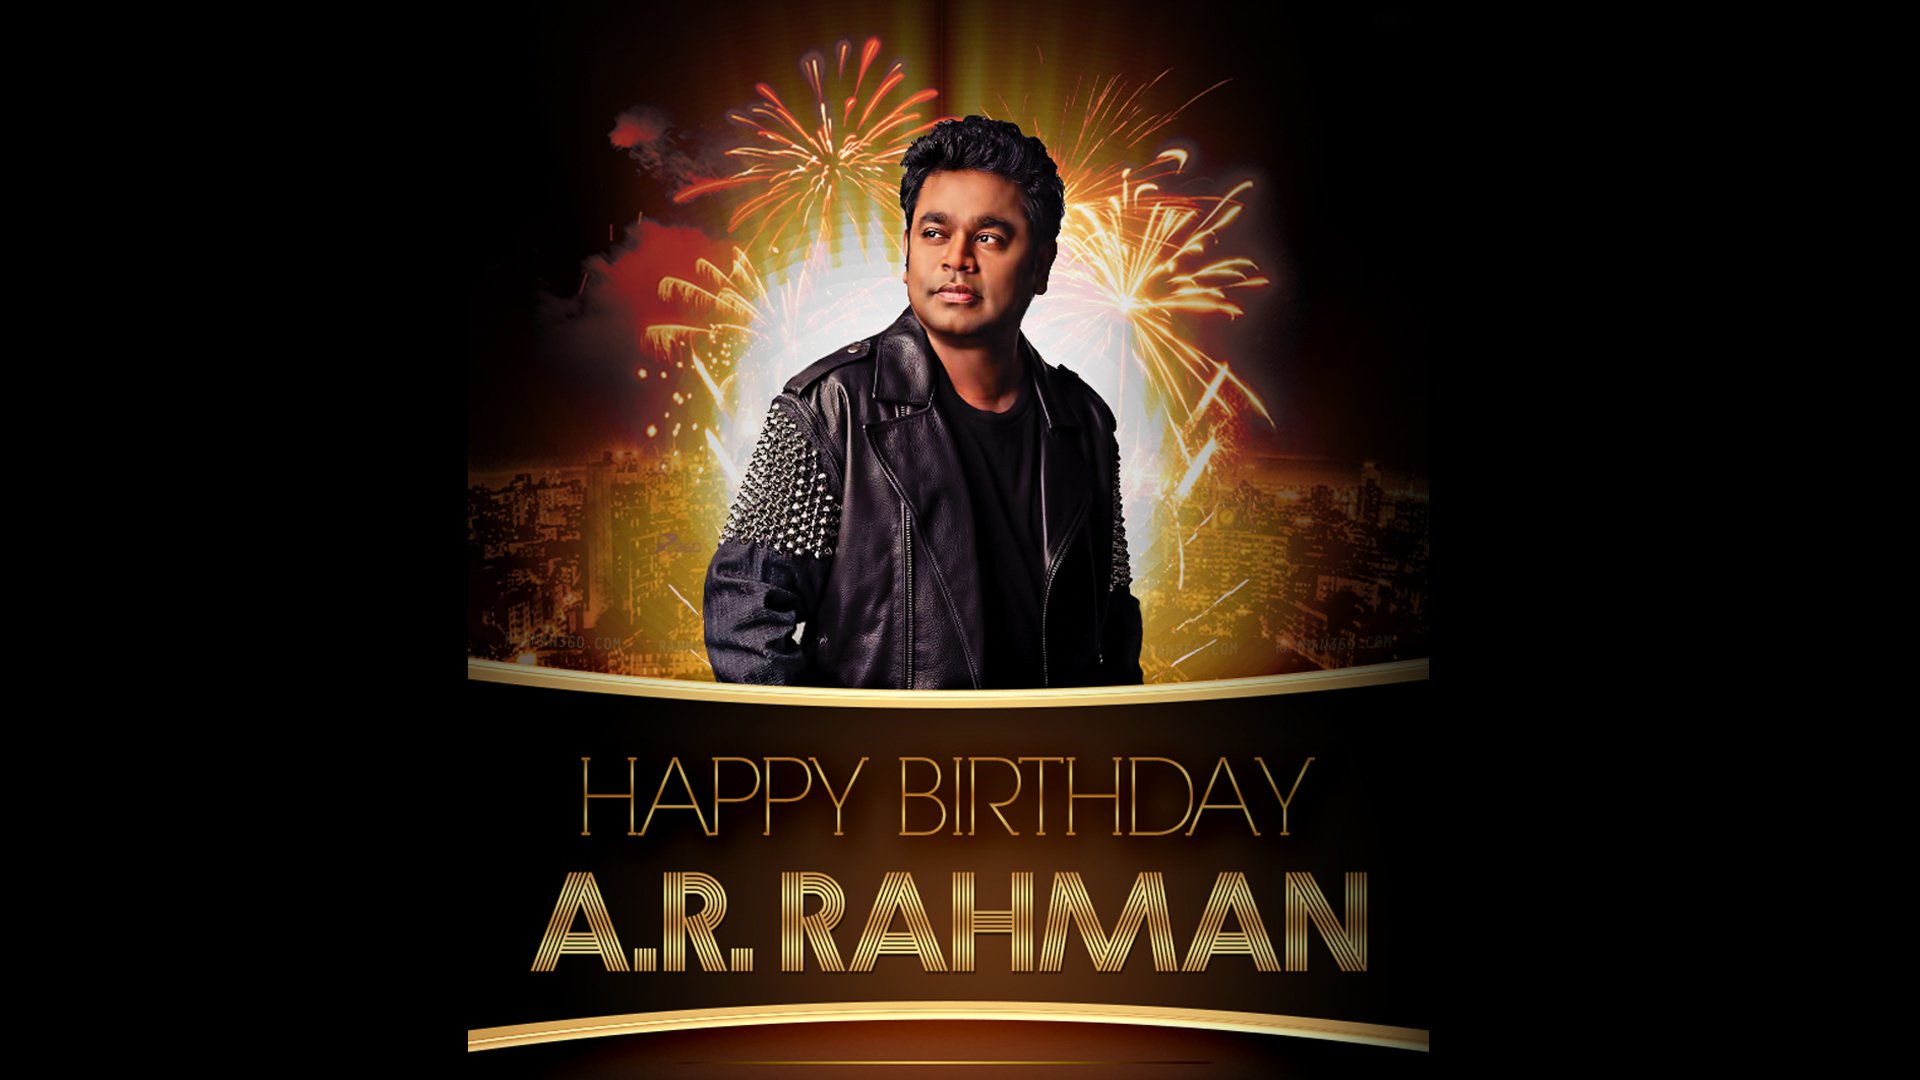    A. R. RAHMAN  I Wish You To Have A Woderrful Time On Your Day!  